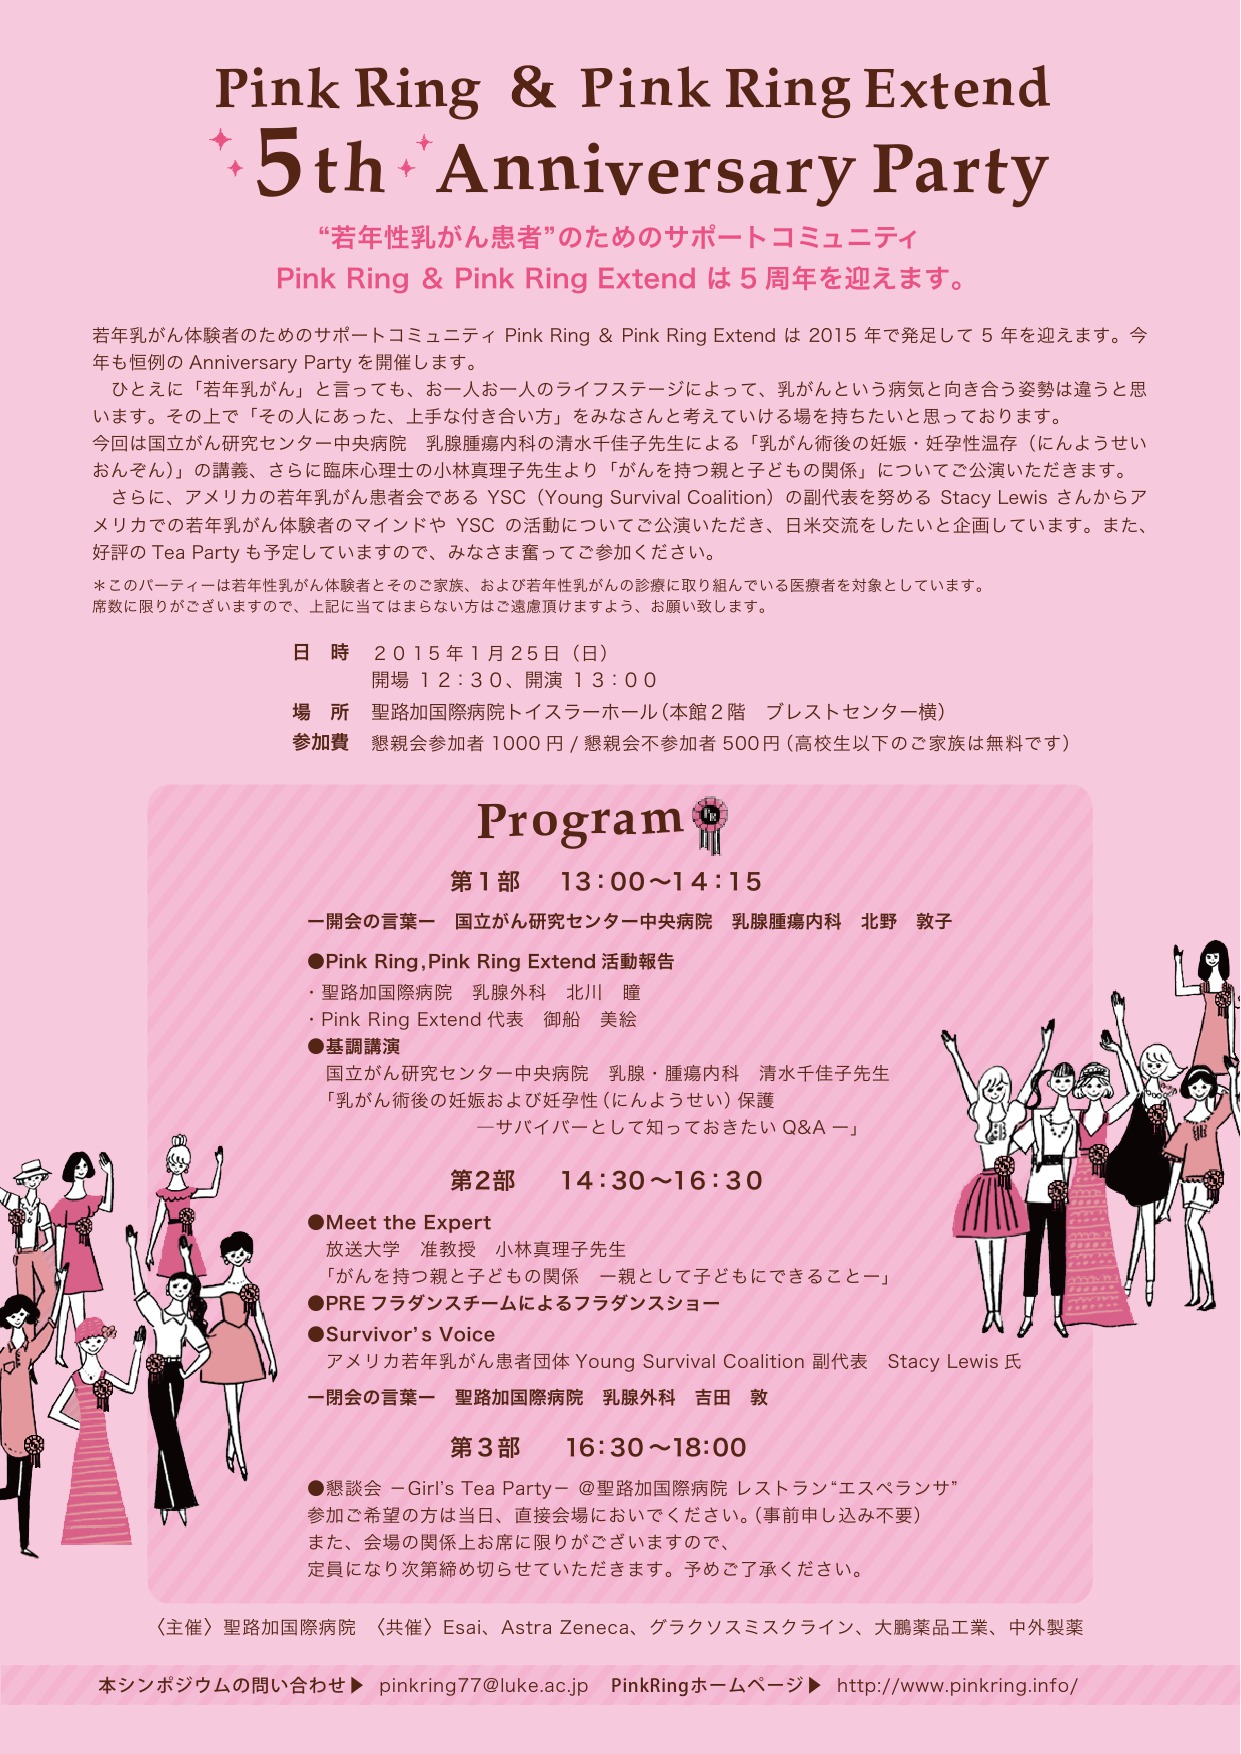 【Pink Ring ＆ Pink Ring Extend 5th Anniversary party】